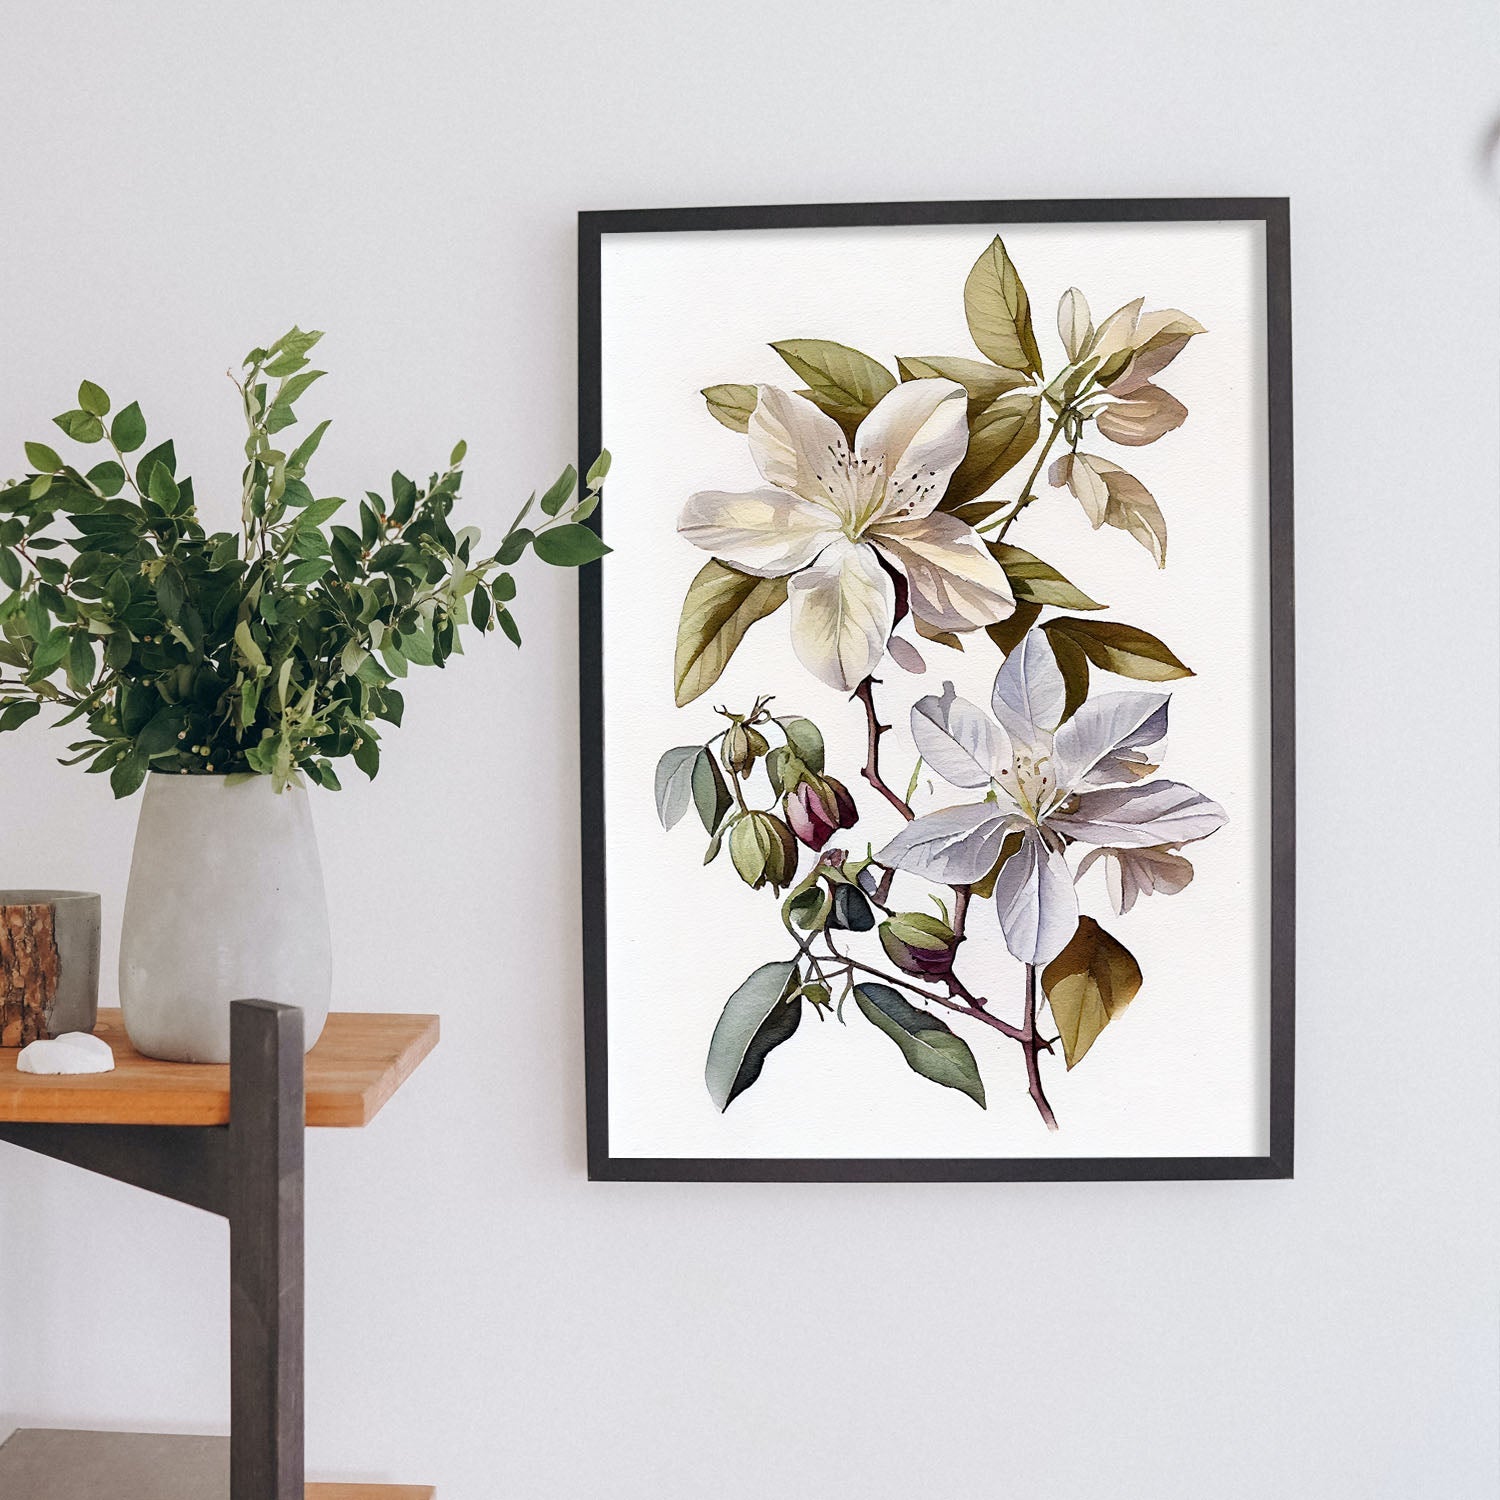 Nacnic watercolor minmal Clematis_4. Aesthetic Wall Art Prints for Bedroom or Living Room Design.-Artwork-Nacnic-A4-Sin Marco-Nacnic Estudio SL